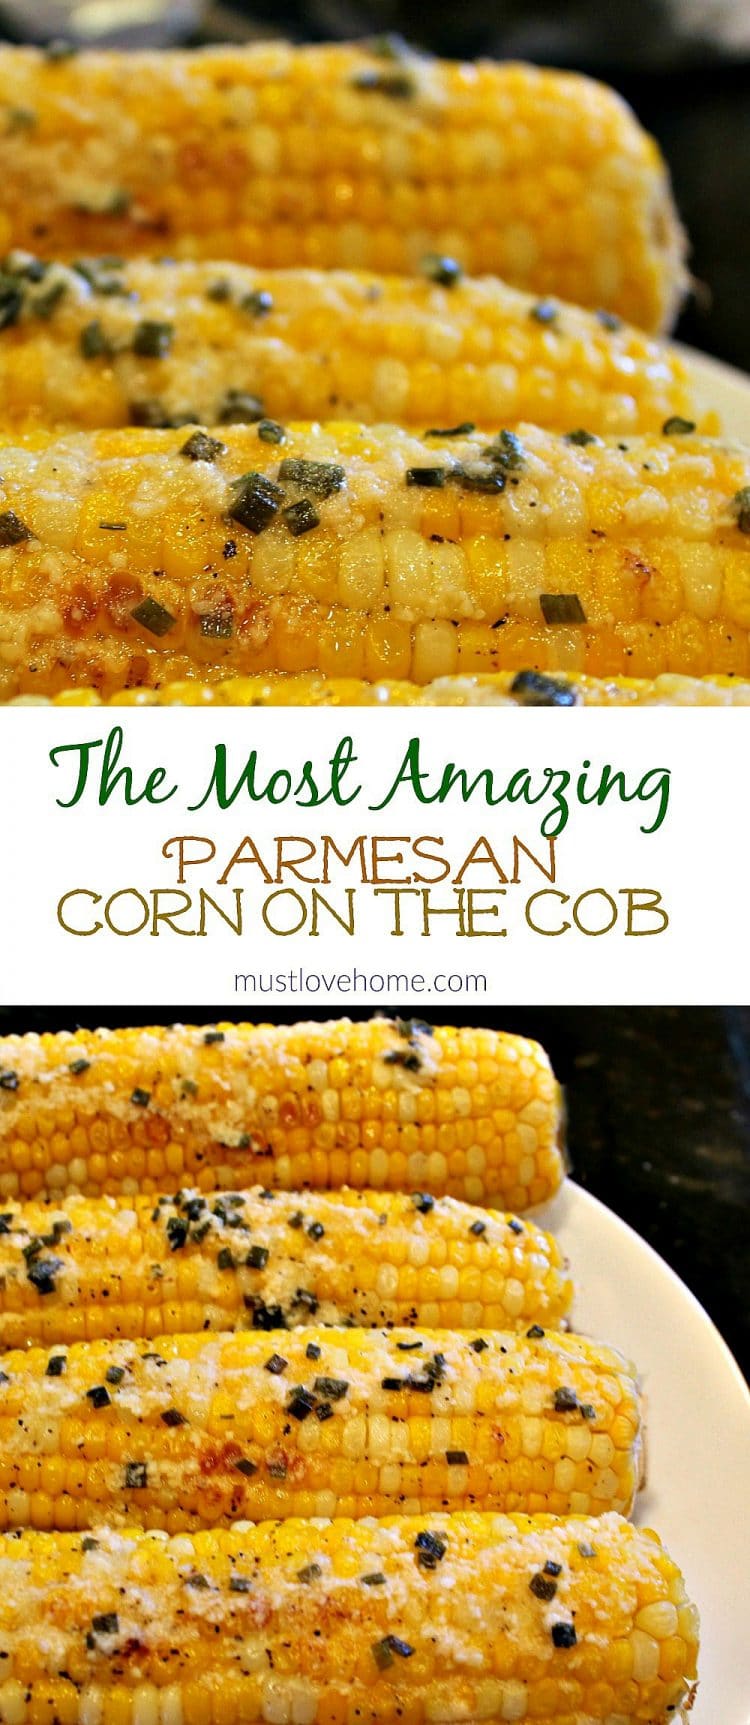 Parmesan Corn On A Cob | Appetizing Side Dishes For Chicken You'll Love | Homemade Recipes